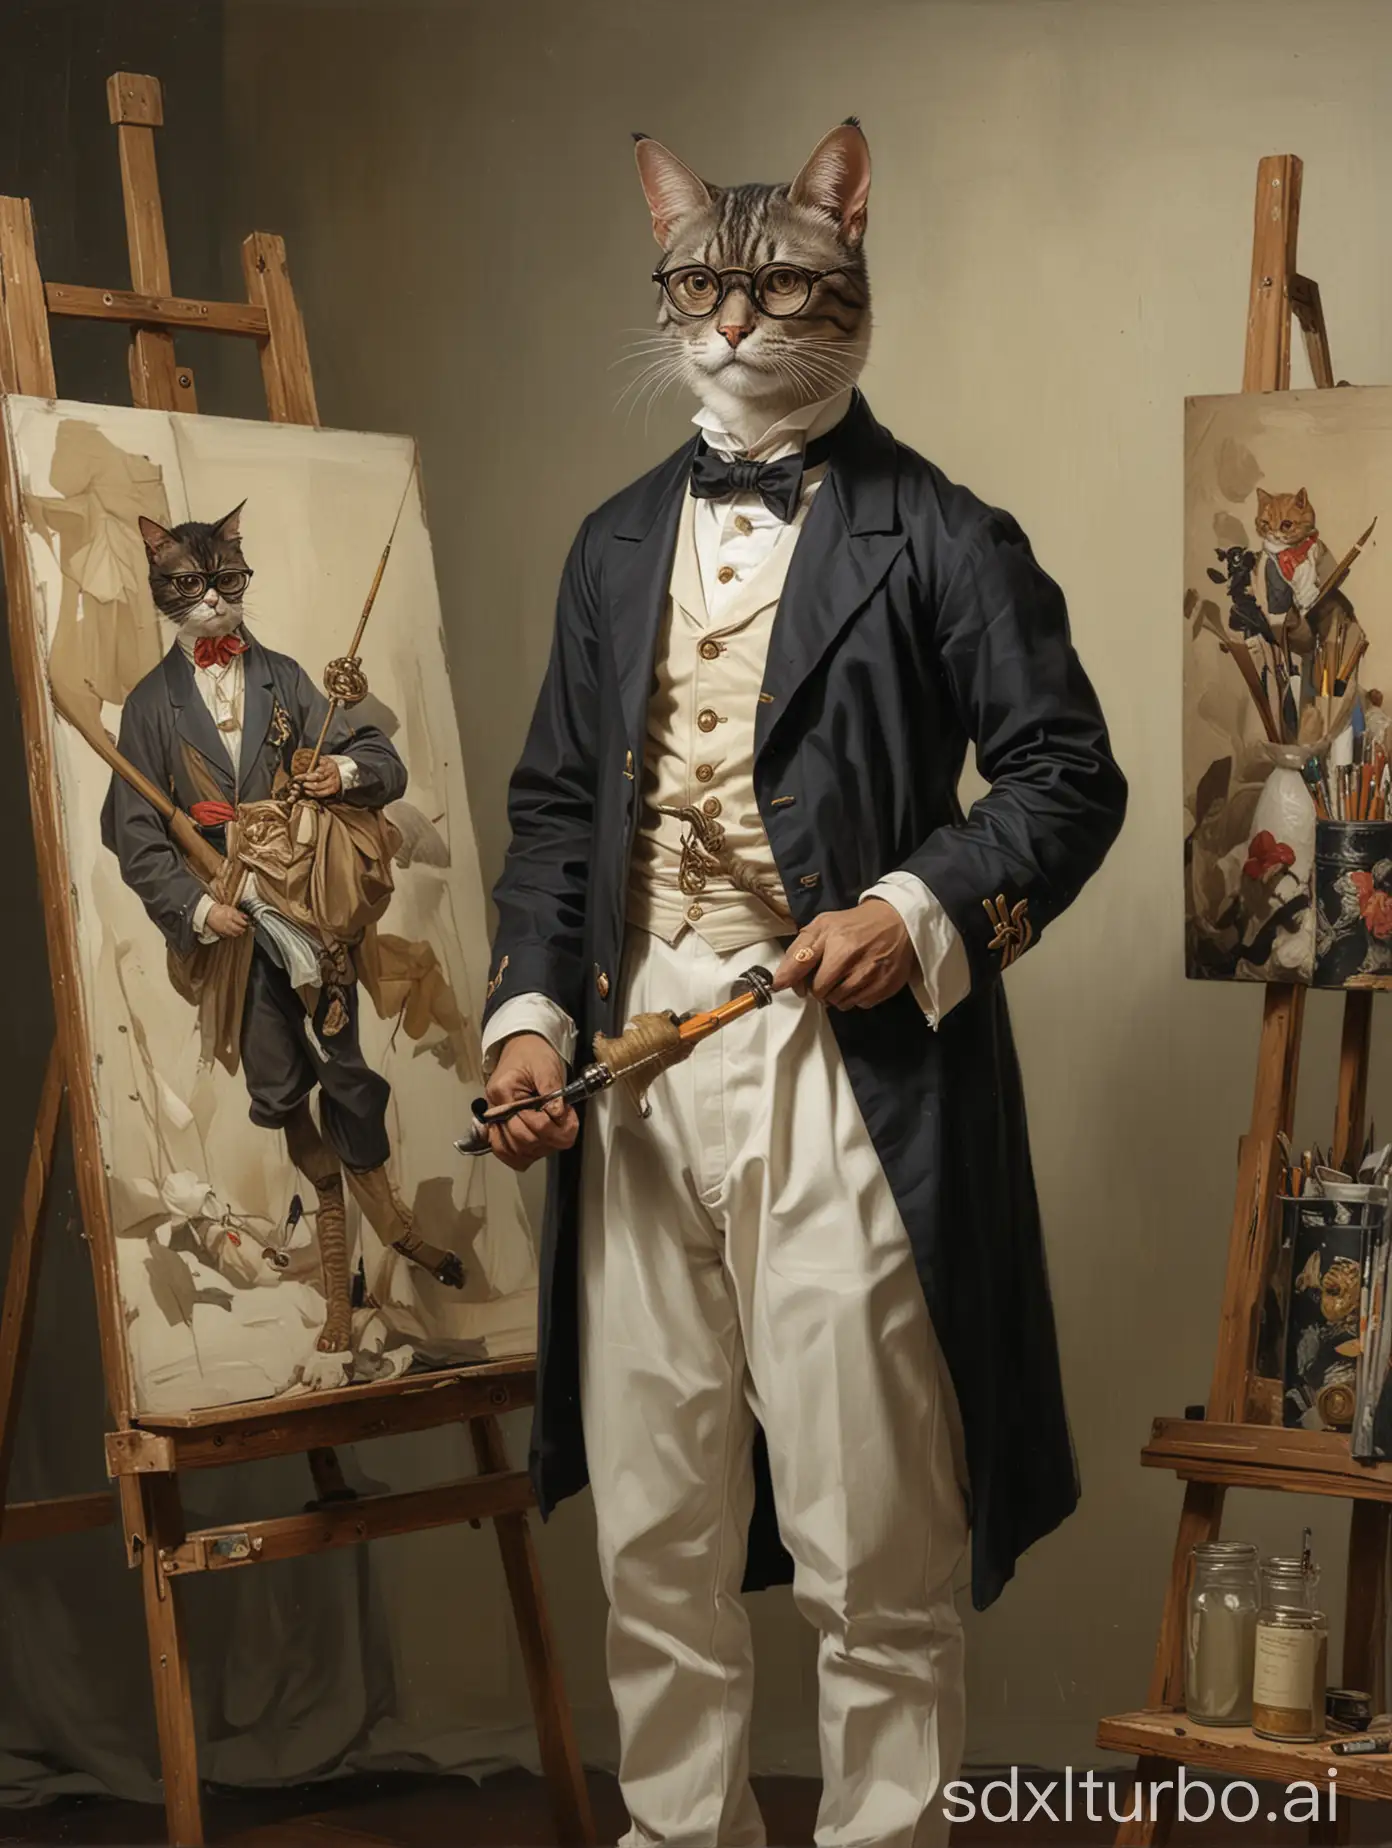 Indonesian-Male-Painter-in-1800s-Studio-with-Marine-Coon-Cat-Leyendecker-Style-Portrait